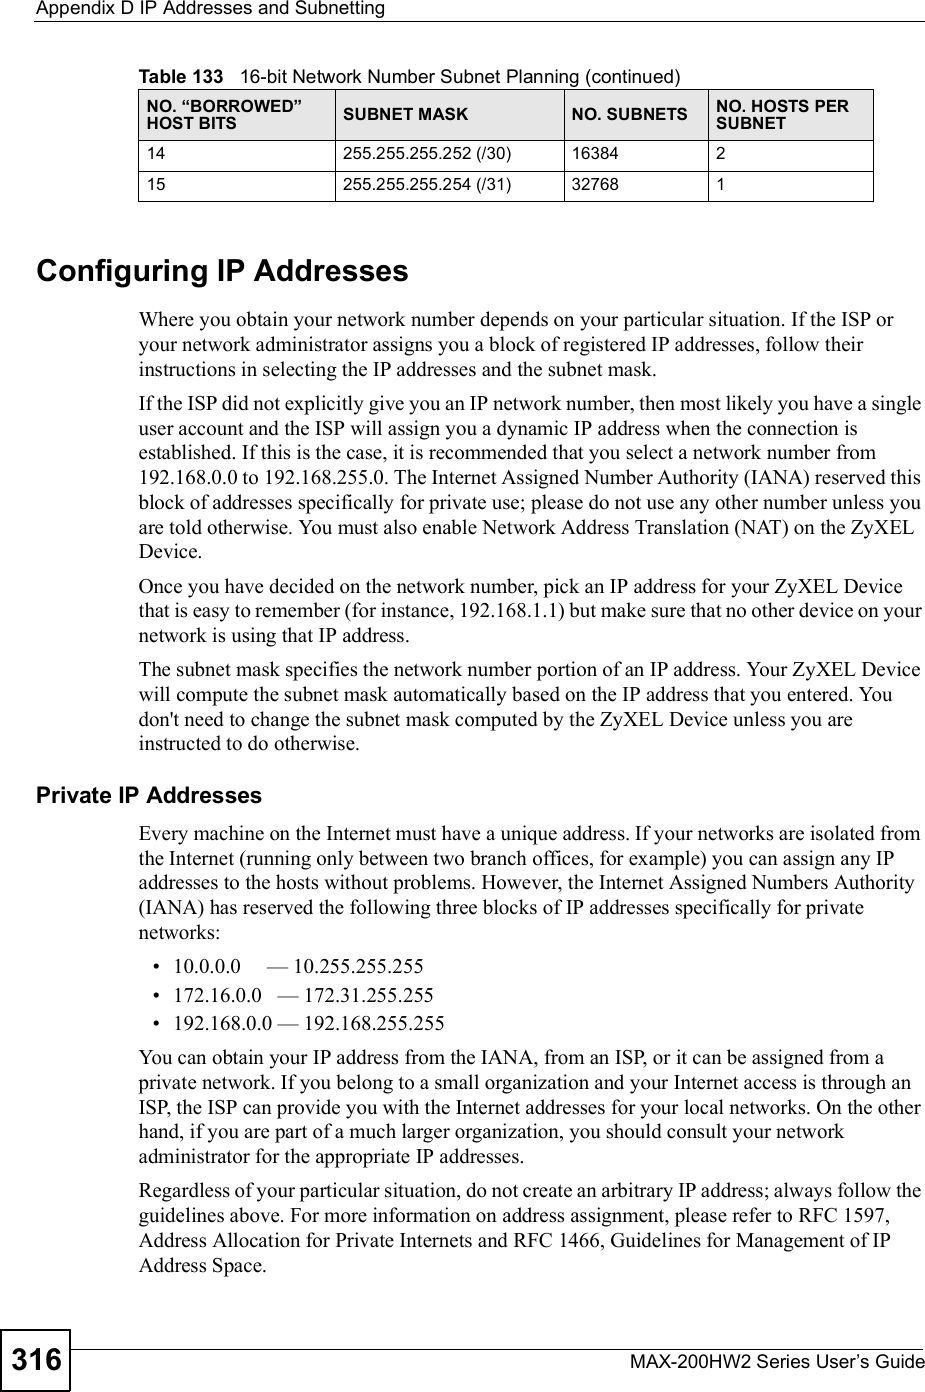 Appendix DIP Addresses and SubnettingMAX-200HW2 Series User s Guide316Configuring IP AddressesWhere you obtain your network number depends on your particular situation. If the ISP or your network administrator assigns you a block of registered IP addresses, follow their instructions in selecting the IP addresses and the subnet mask.If the ISP did not explicitly give you an IP network number, then most likely you have a single user account and the ISP will assign you a dynamic IP address when the connection is established. If this is the case, it is recommended that you select a network number from 192.168.0.0 to 192.168.255.0. The Internet Assigned Number Authority (IANA) reserved this block of addresses specifically for private use; please do not use any other number unless you are told otherwise. You must also enable Network Address Translation (NAT) on the ZyXEL Device.Once you have decided on the network number, pick an IP address for your ZyXEL Device that is easy to remember (for instance, 192.168.1.1) but make sure that no other device on your network is using that IP address.The subnet mask specifies the network number portion of an IP address. Your ZyXEL Device will compute the subnet mask automatically based on the IP address that you entered. You don&apos;t need to change the subnet mask computed by the ZyXEL Device unless you are instructed to do otherwise.Private IP AddressesEvery machine on the Internet must have a unique address. If your networks are isolated from the Internet (running only between two branch offices, for example) you can assign any IP addresses to the hosts without problems. However, the Internet Assigned Numbers Authority (IANA) has reserved the following three blocks of IP addresses specifically for private networks: 10.0.0.0     &apos; 10.255.255.255 172.16.0.0   &apos; 172.31.255.255 192.168.0.0 &apos; 192.168.255.255You can obtain your IP address from the IANA, from an ISP, or it can be assigned from a private network. If you belong to a small organization and your Internet access is through an ISP, the ISP can provide you with the Internet addresses for your local networks. On the other hand, if you are part of a much larger organization, you should consult your network administrator for the appropriate IP addresses.Regardless of your particular situation, do not create an arbitrary IP address; always follow the guidelines above. For more information on address assignment, please refer to RFC 1597, Address Allocation for Private Internets and RFC 1466, Guidelines for Management of IP Address Space.14 255.255.255.252 (/30) 16384 215 255.255.255.254 (/31) 32768 1Table 133   16-bit Network Number Subnet Planning (continued)NO. &quot;BORROWED# HOST BITS SUBNET MASK NO. SUBNETS NO. HOSTS PER SUBNET